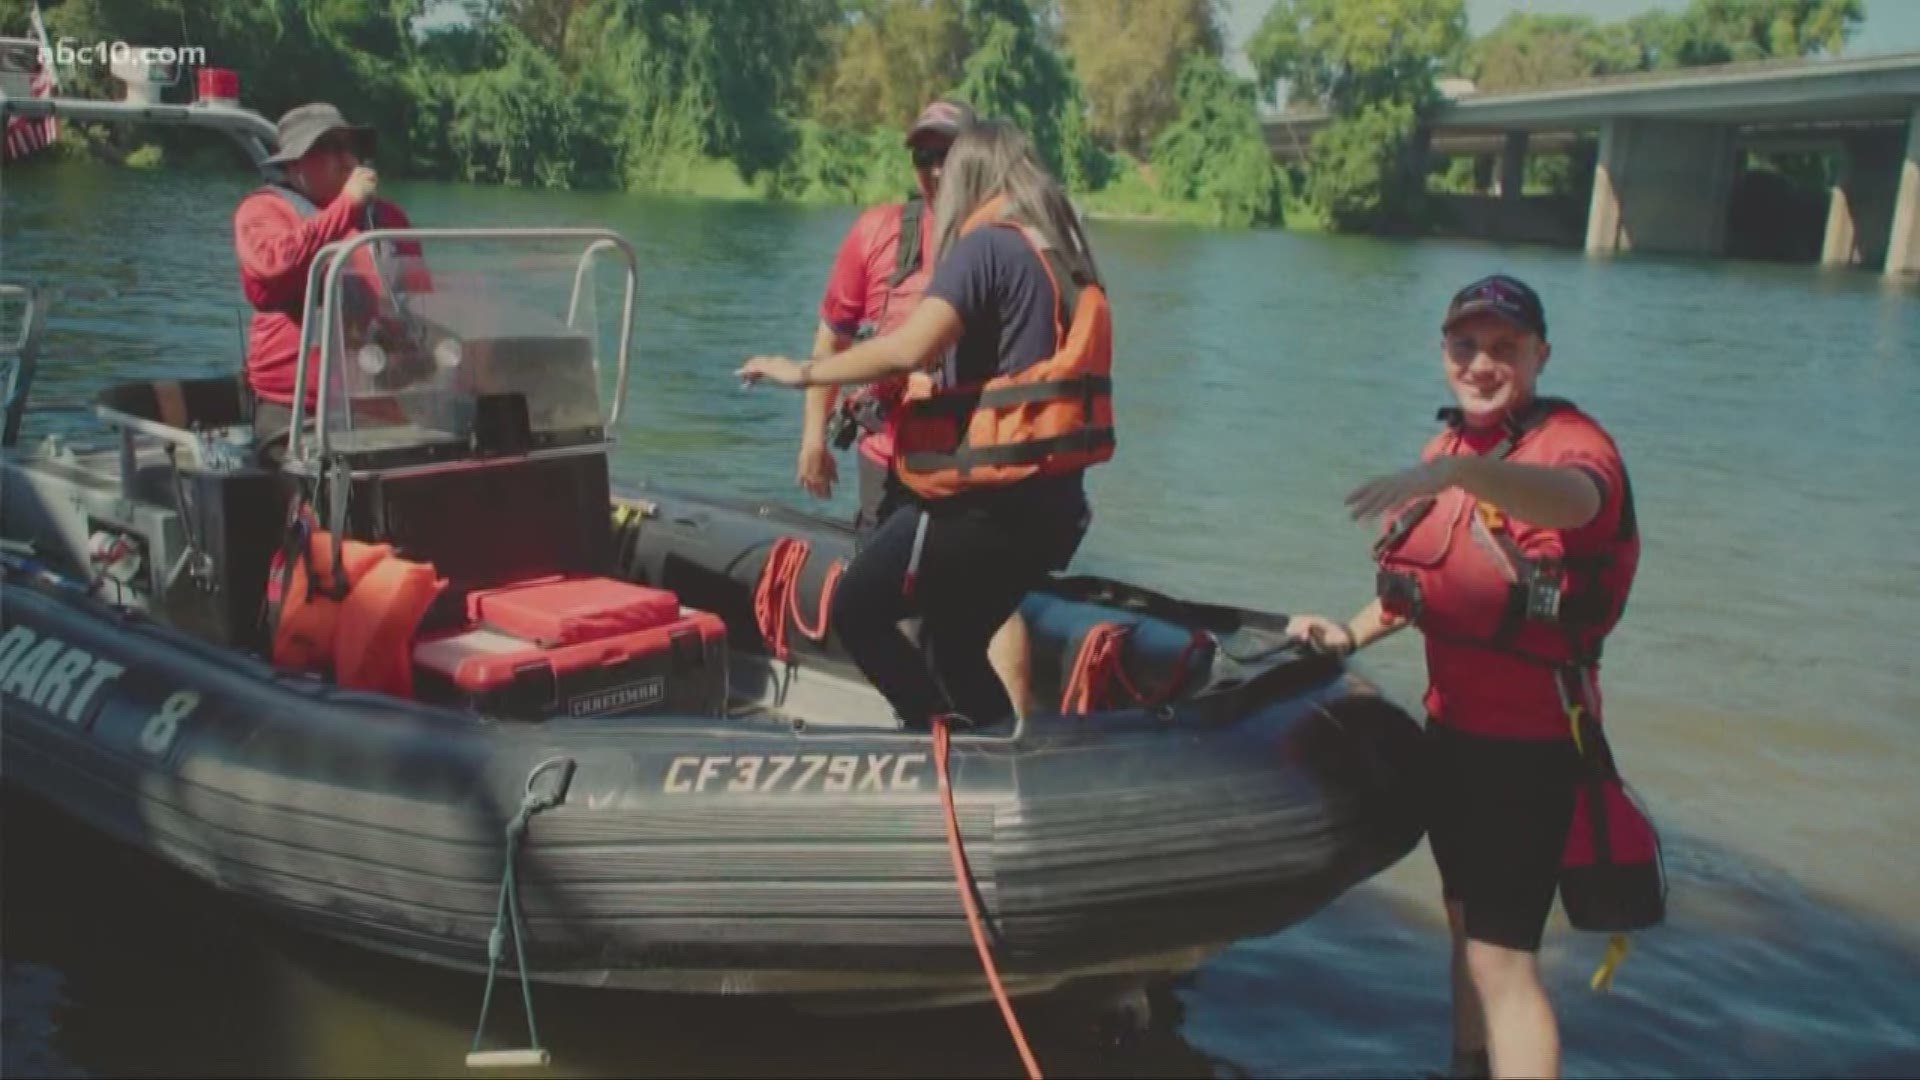 According to Sacramento Drowning Accident Rescue Team, there have been zero recreational drownings this year.